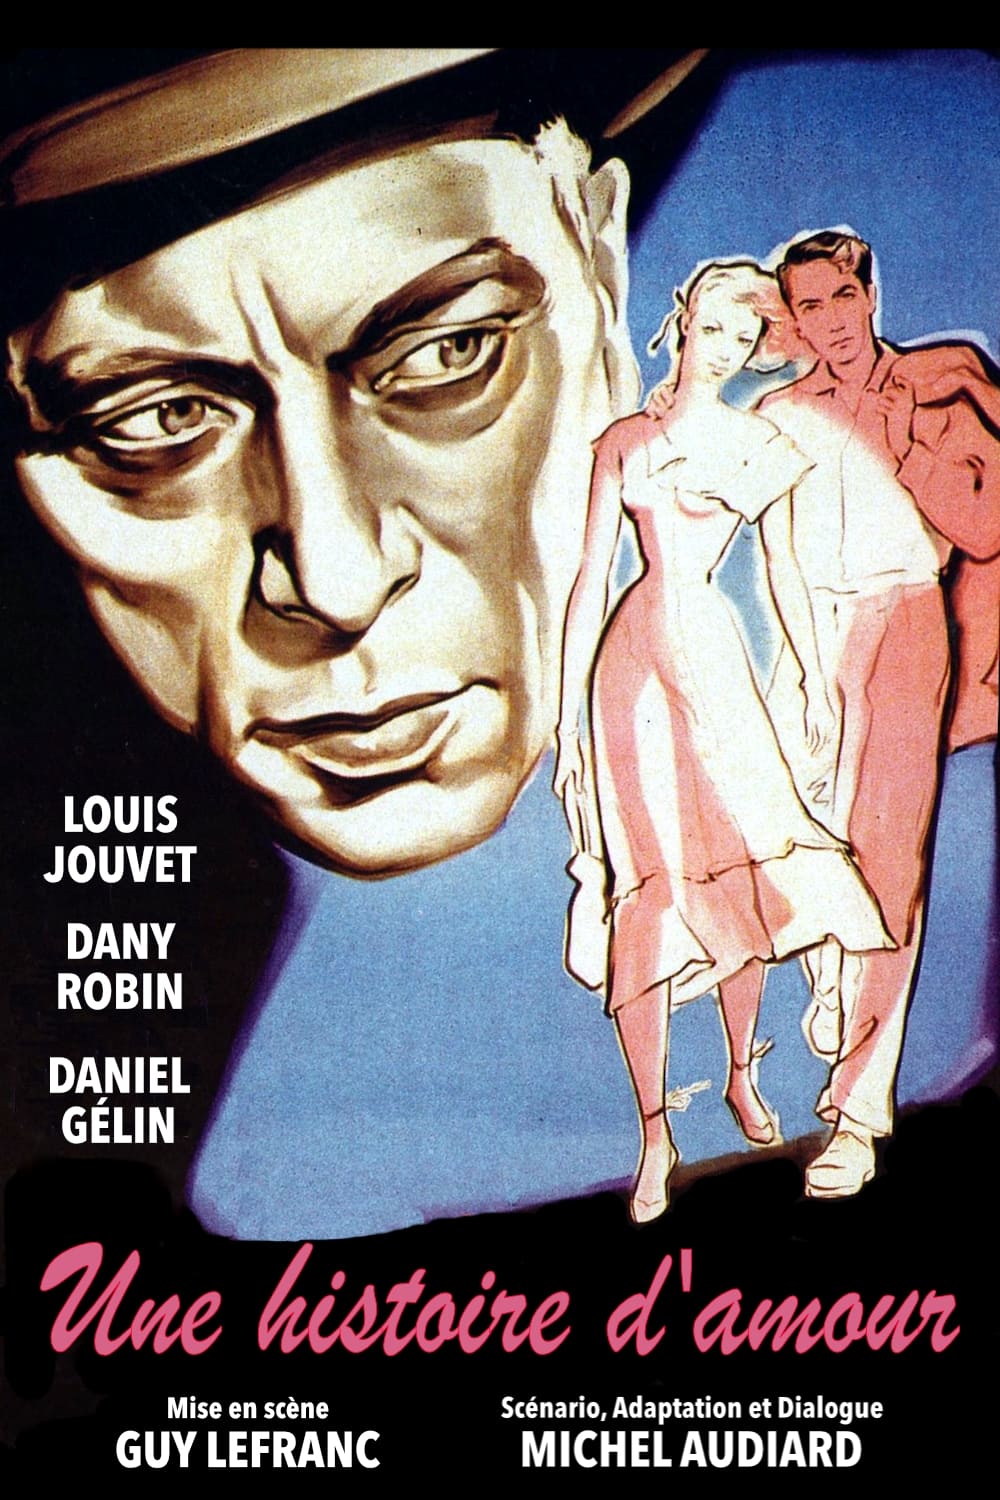 Young Love (1951)